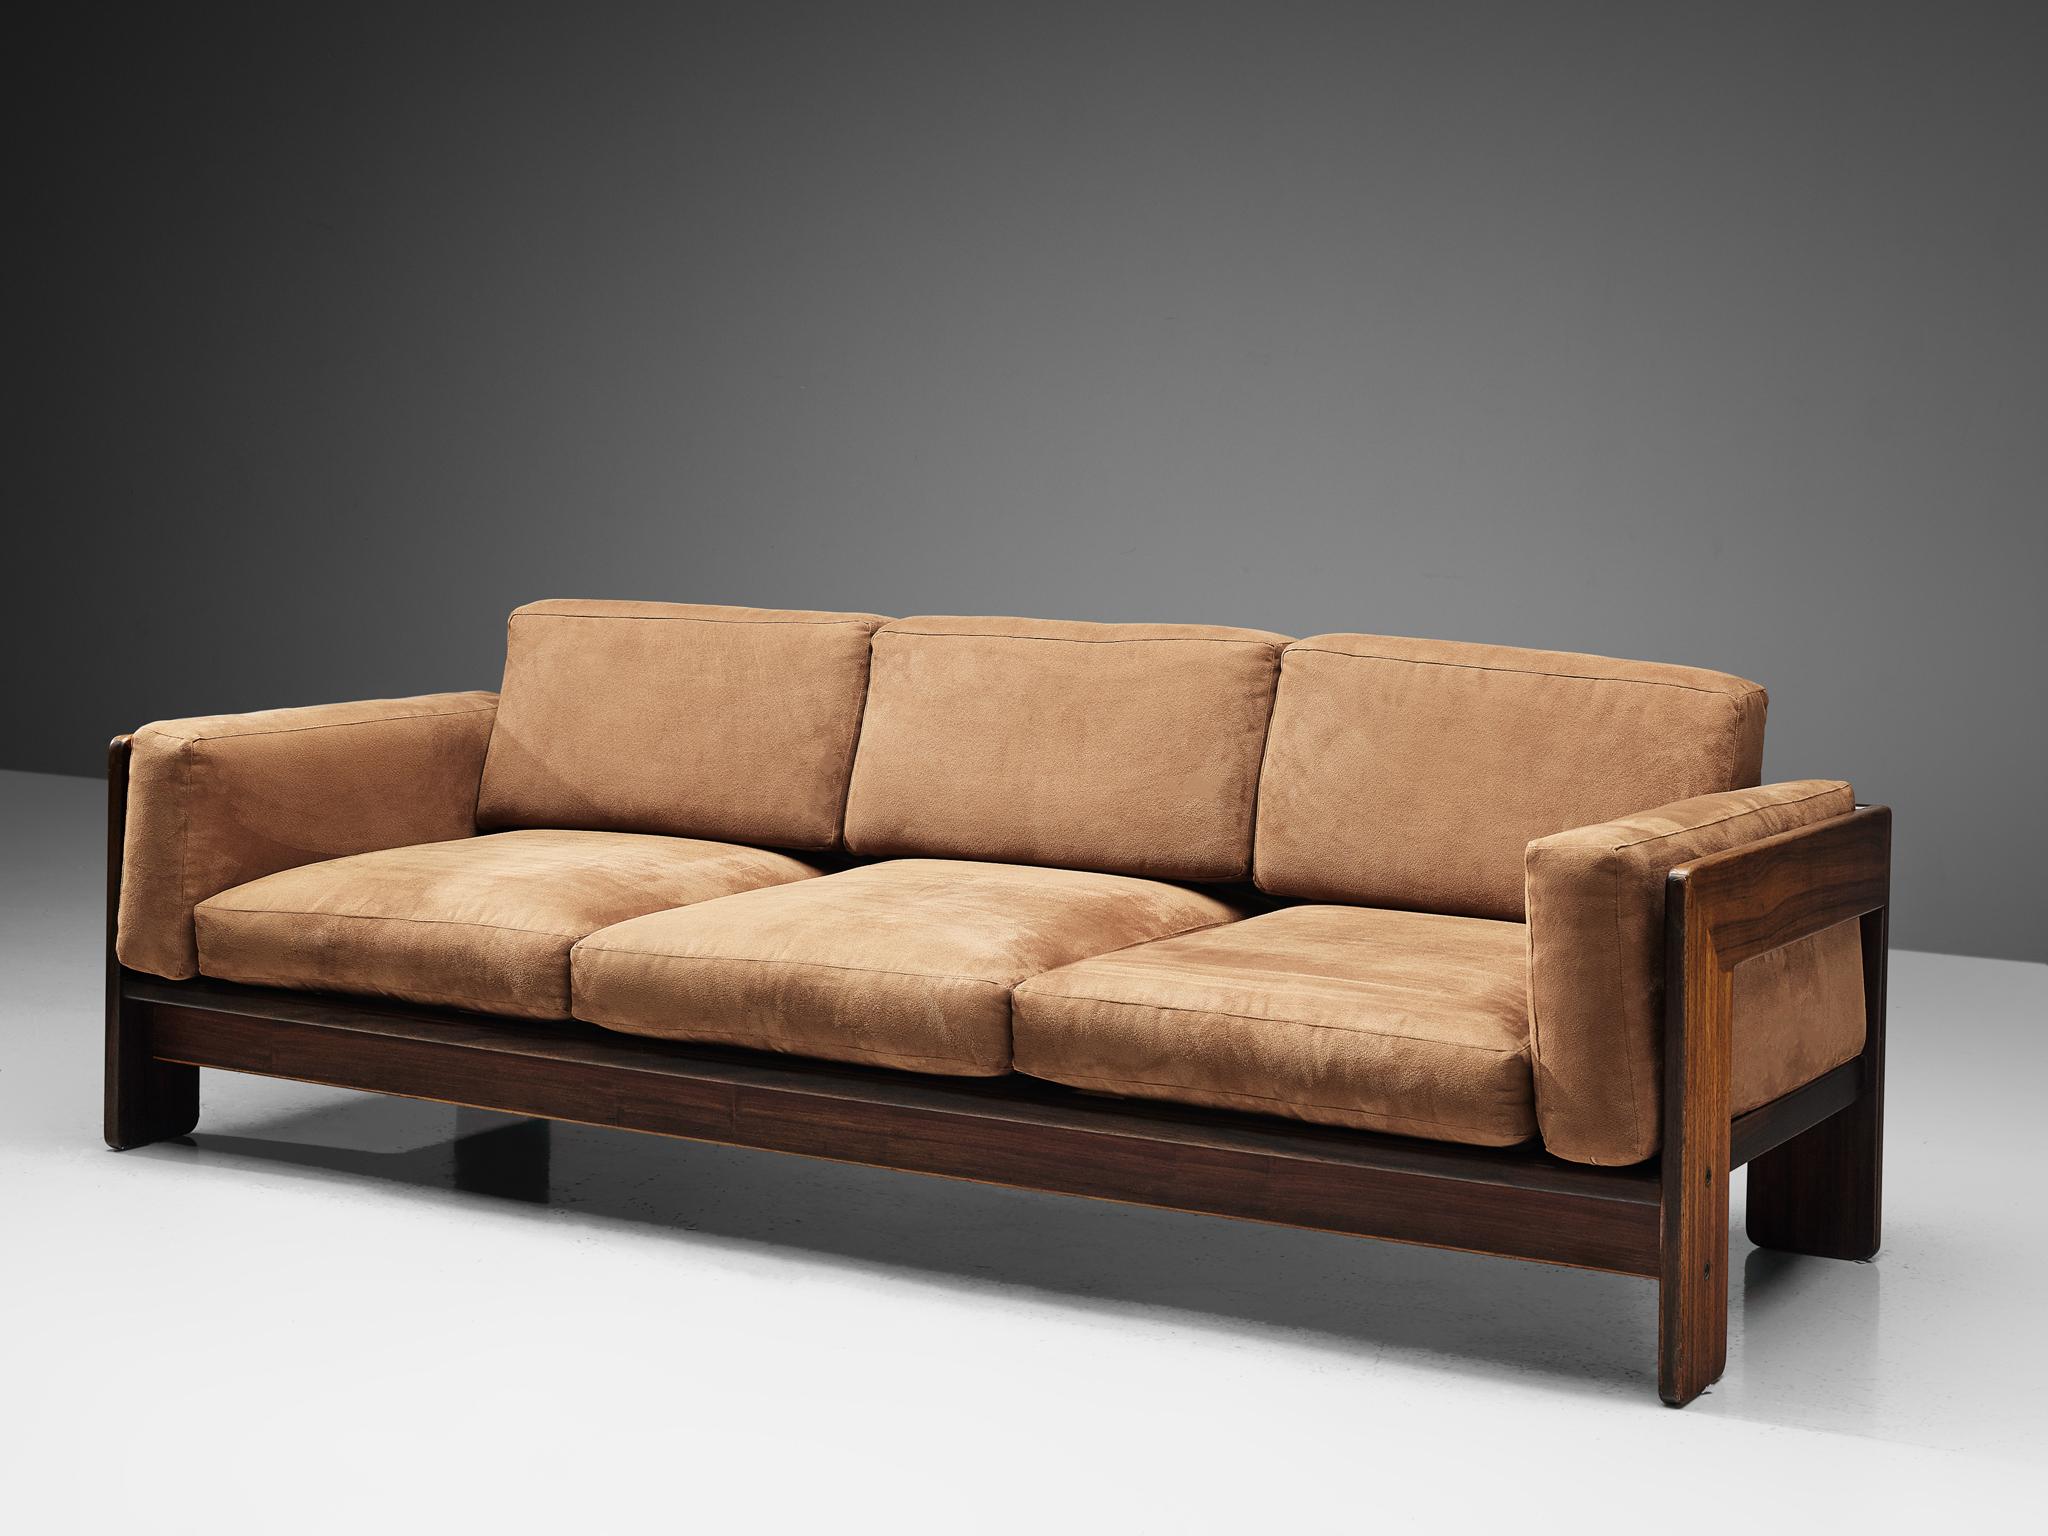 Tobia Scarpa for Knoll, 'Bastiano' sofa, fabric and walnut, Italy, design 1960, manufactured between 1969-1970s

Beautiful Bastiano sofa made with a walnut frame and brown fabric cushions. Tobia Scarpa designed the Bastiano series for the